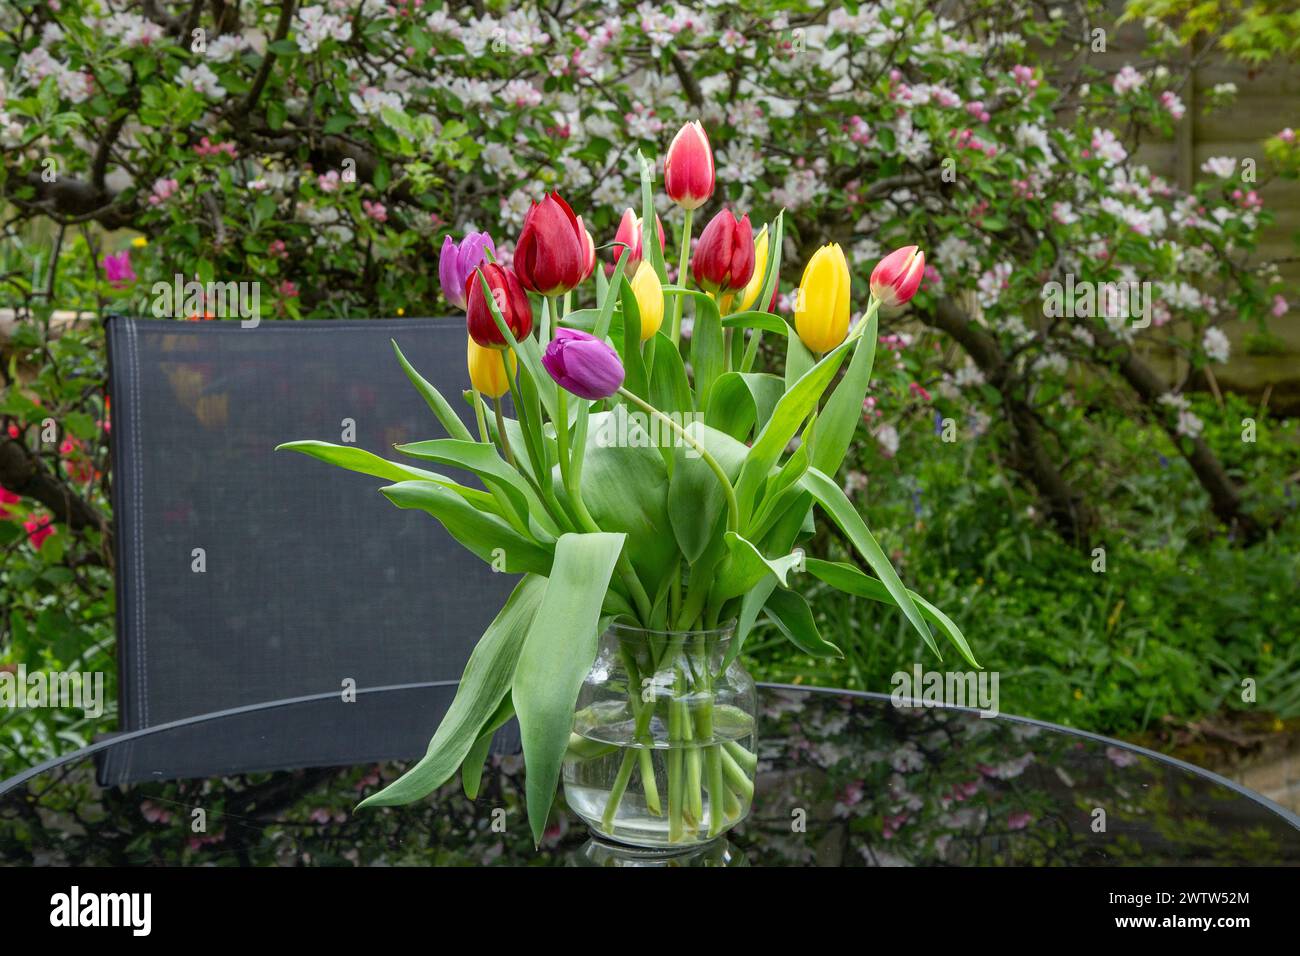 Spring tulips in a vase on a garden table. The table is next to corden apple trees in full blossom. Stock Photo